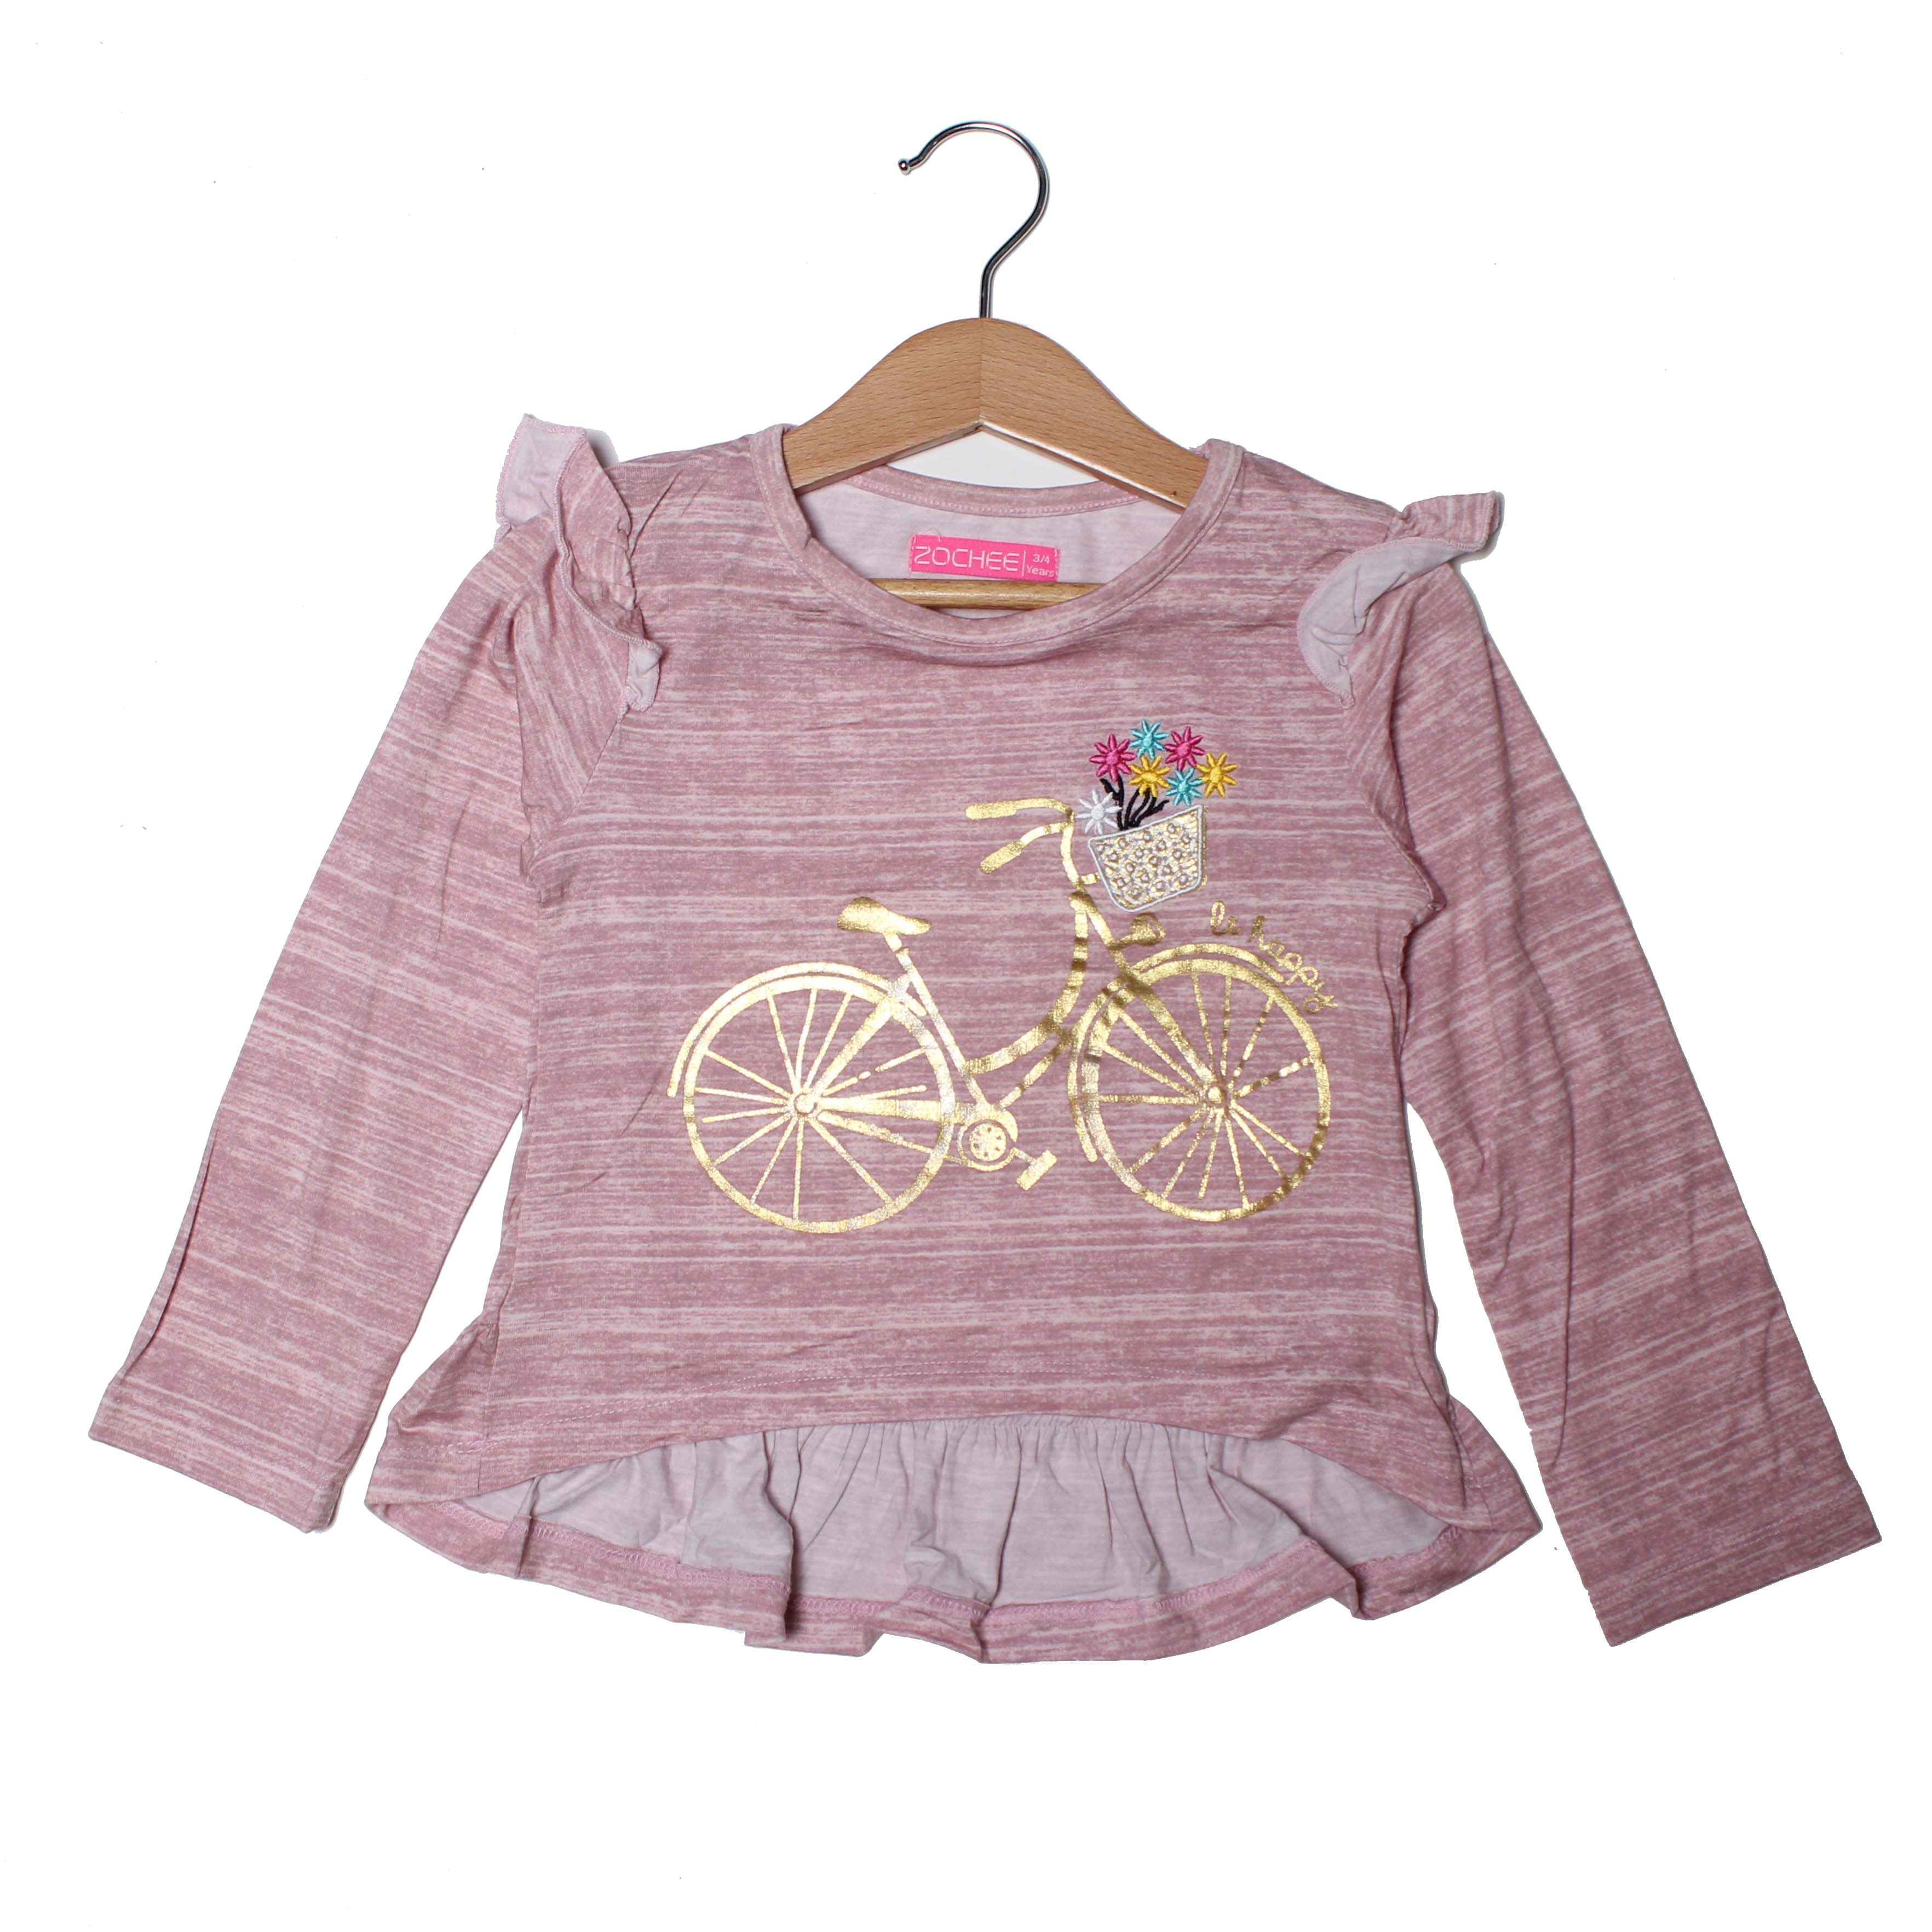 NEW PINK CYCLE PRINTED TOP FOR GIRLS